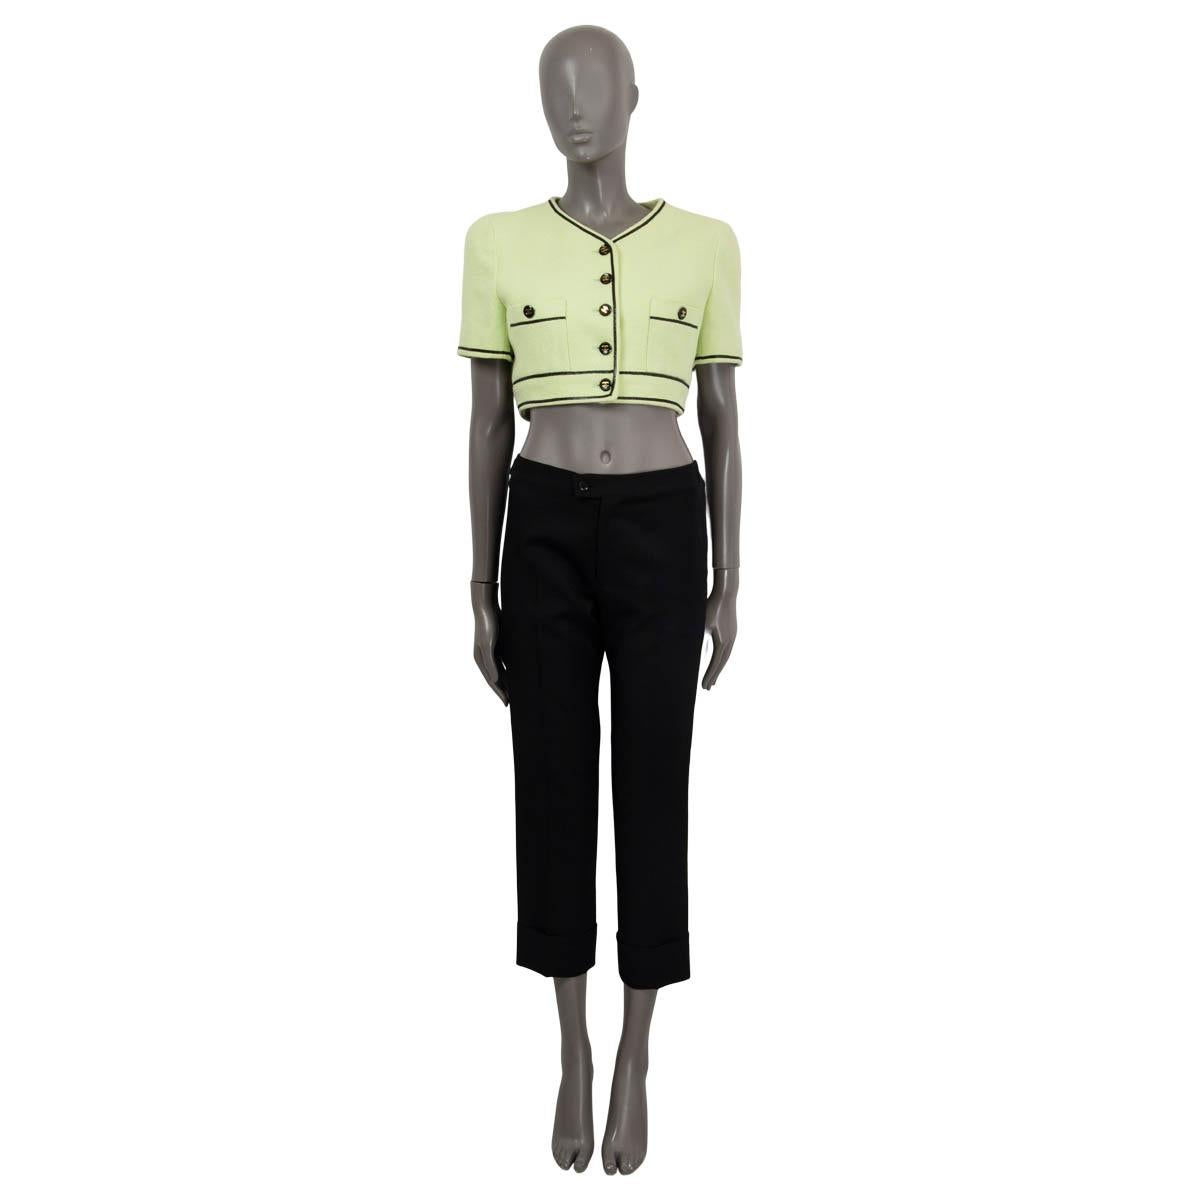 100% authentic Chanel iconic short sleeve cropped jacket in lime green cotton (100%) from the 1995 spring/summer micorsuit collection. Features a black contrast trim and two 'CC' buttoned patch pockets on the front. Opens with 'CC' buttons on the